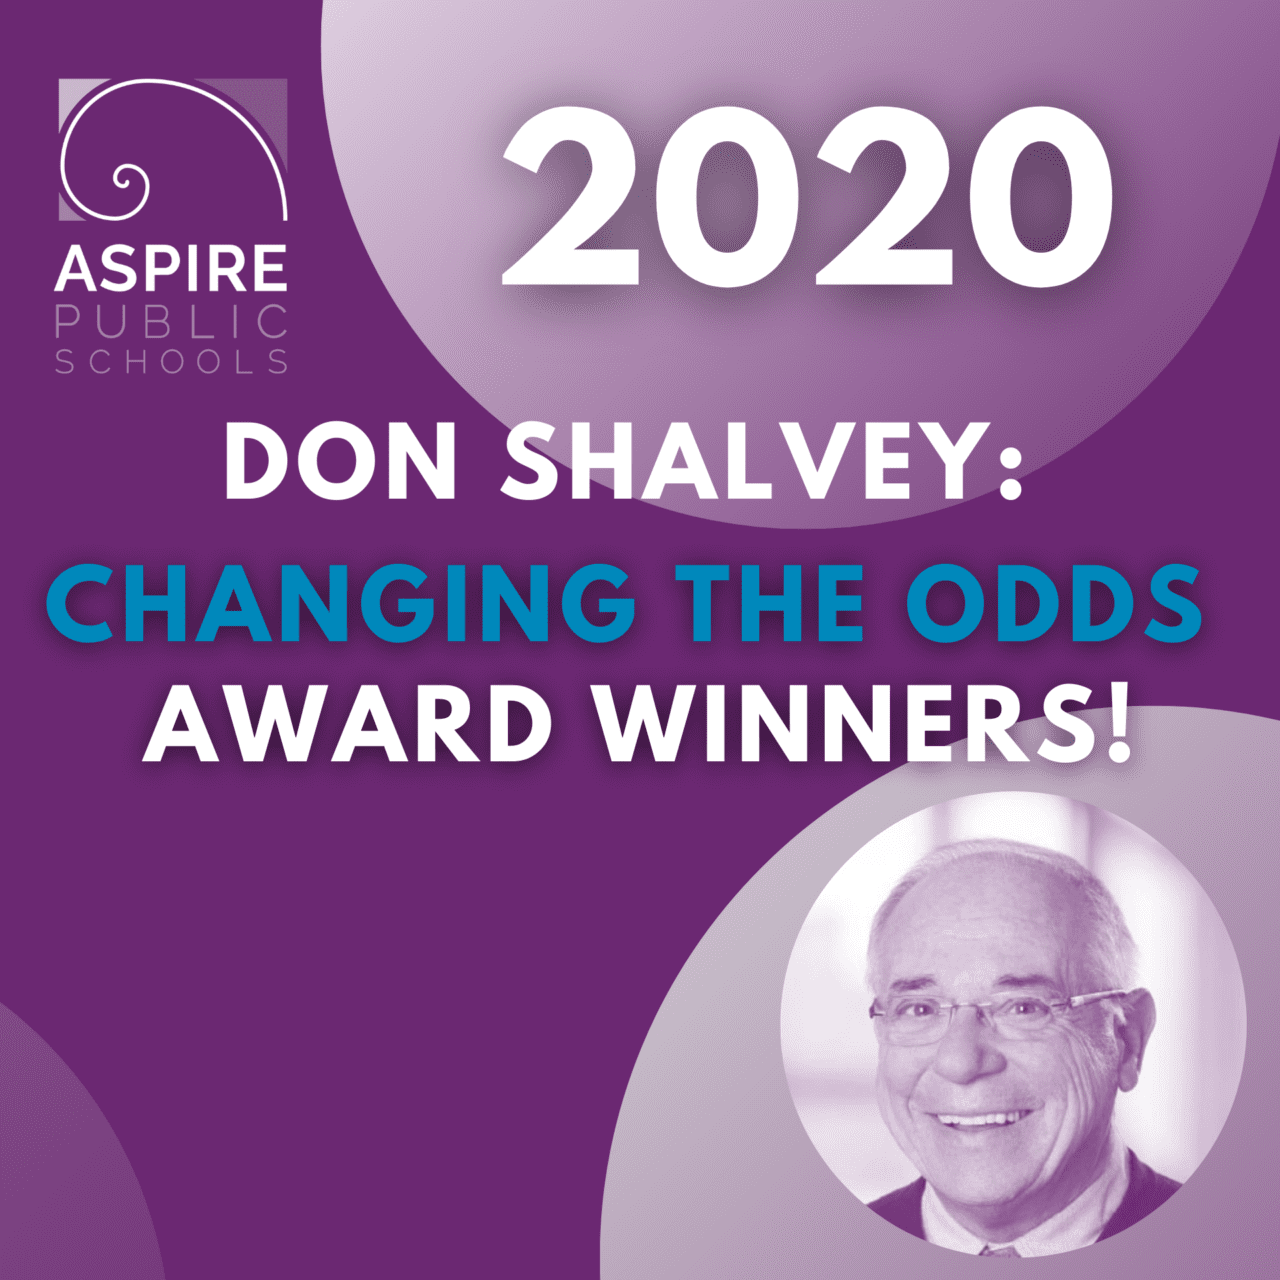 Decorative cover image of 2020 Don Shalvey award graphic